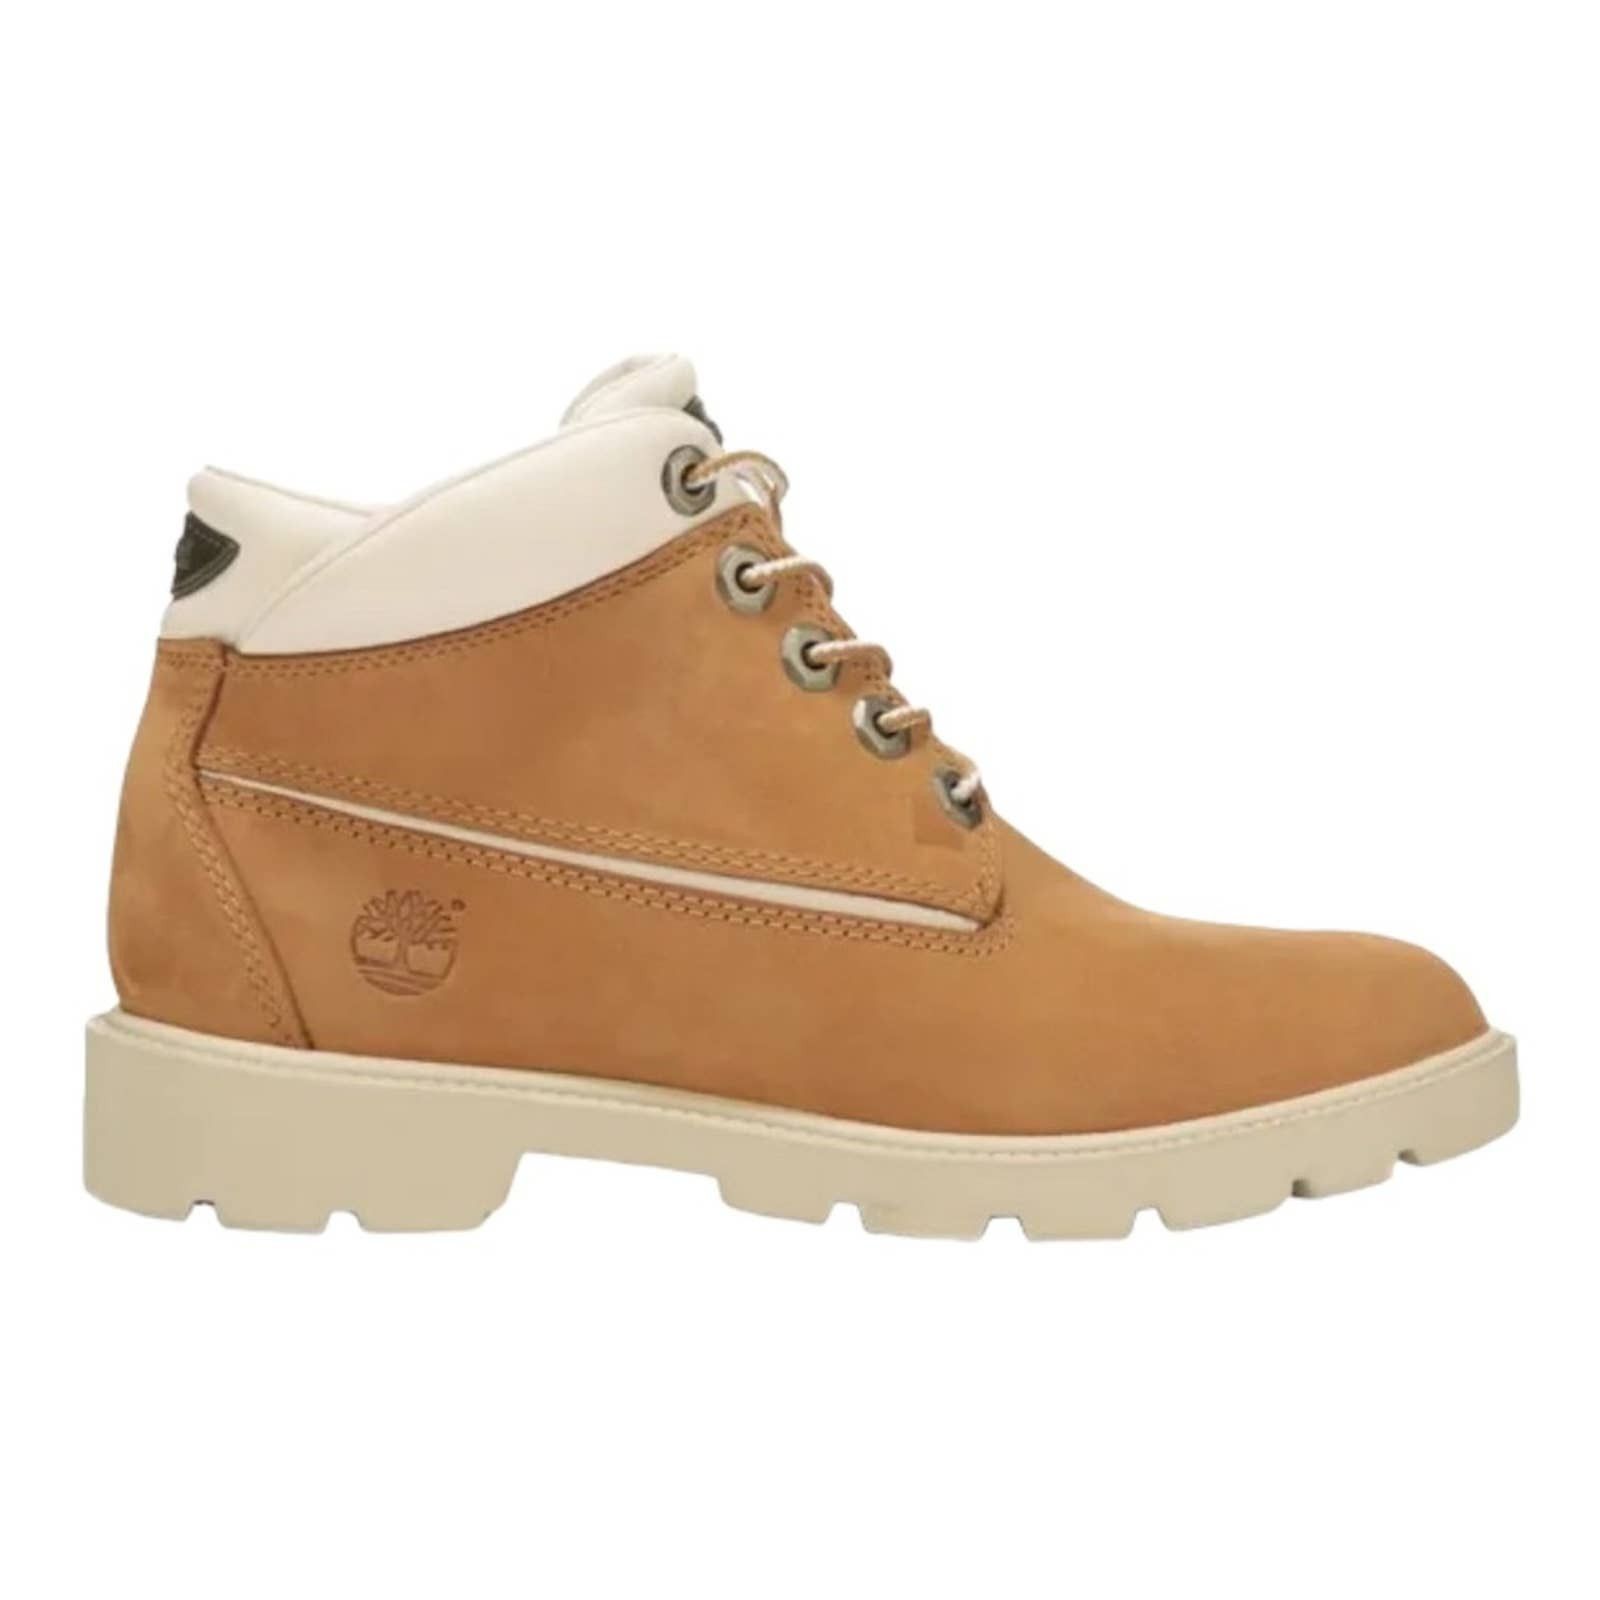 Timberland Timberland 5-Eye Leather Chukka Boot in Tan Size 7 Size US 8 / IT 38 - 1 Preview